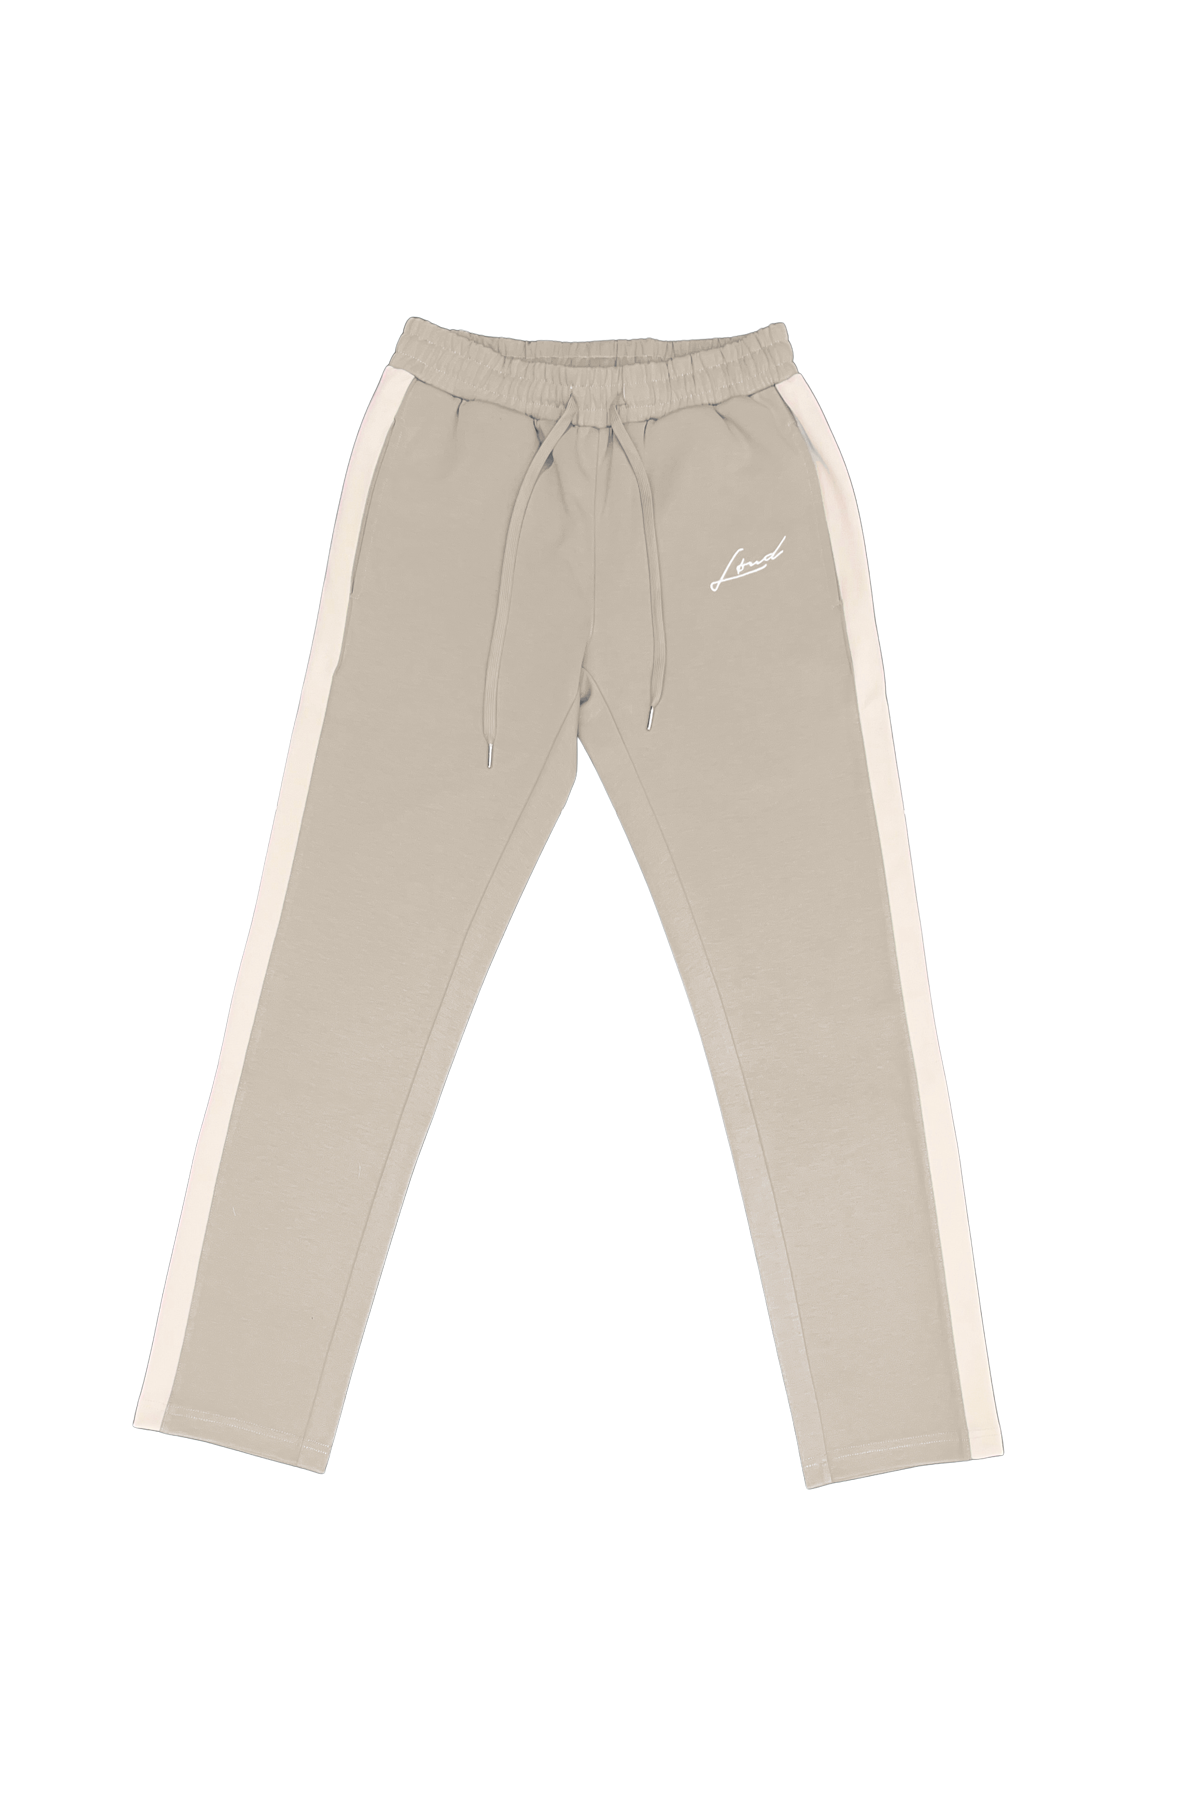 Loud Brown and Cream Joggers - Live Look Loud